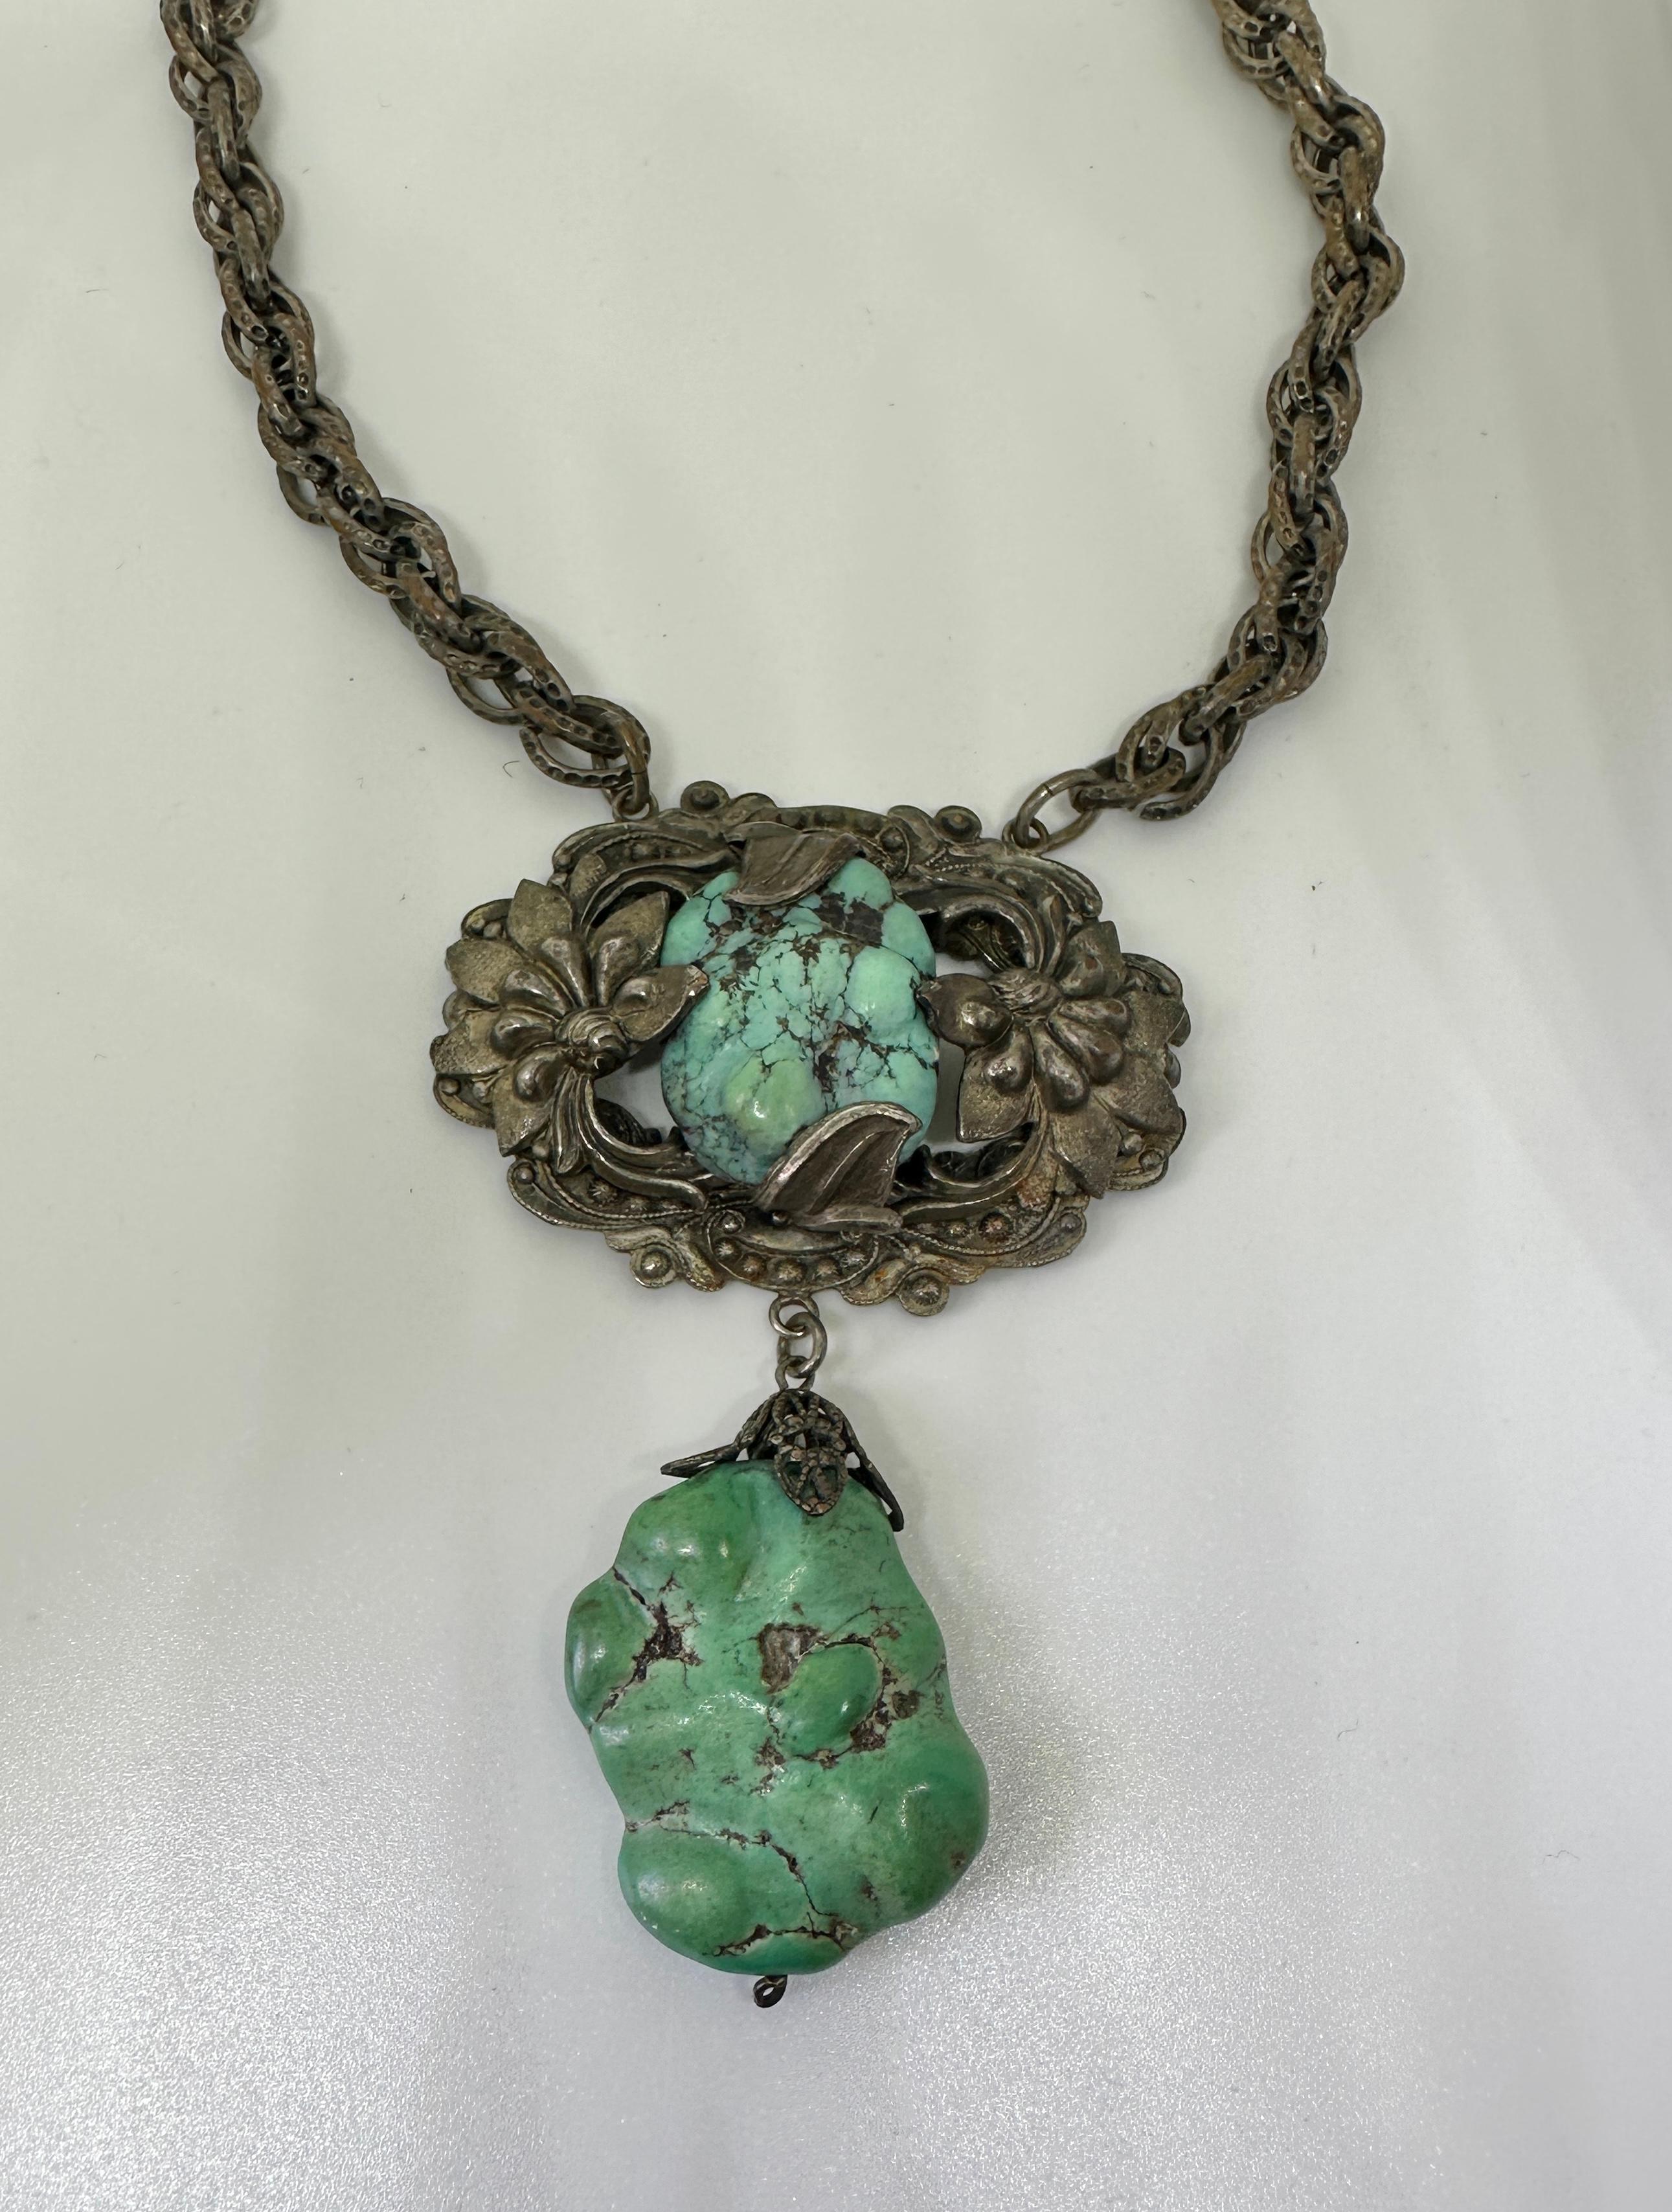 THIS IS AN ANTIQUE ART DECO - VICTORIAN CHINESE EXPORT PENDANT NECKLACE WITH GORGEOUS NATURAL UNTREATED SPIDER WEB TURQUOISE IN A DRAMATIC AND WONDERFUL CHRYSANTHEMUM FLOWER DESIGN IN SILVER.  A VERY RARE AND WONDERFUL JEWEL!
The stunning effect of